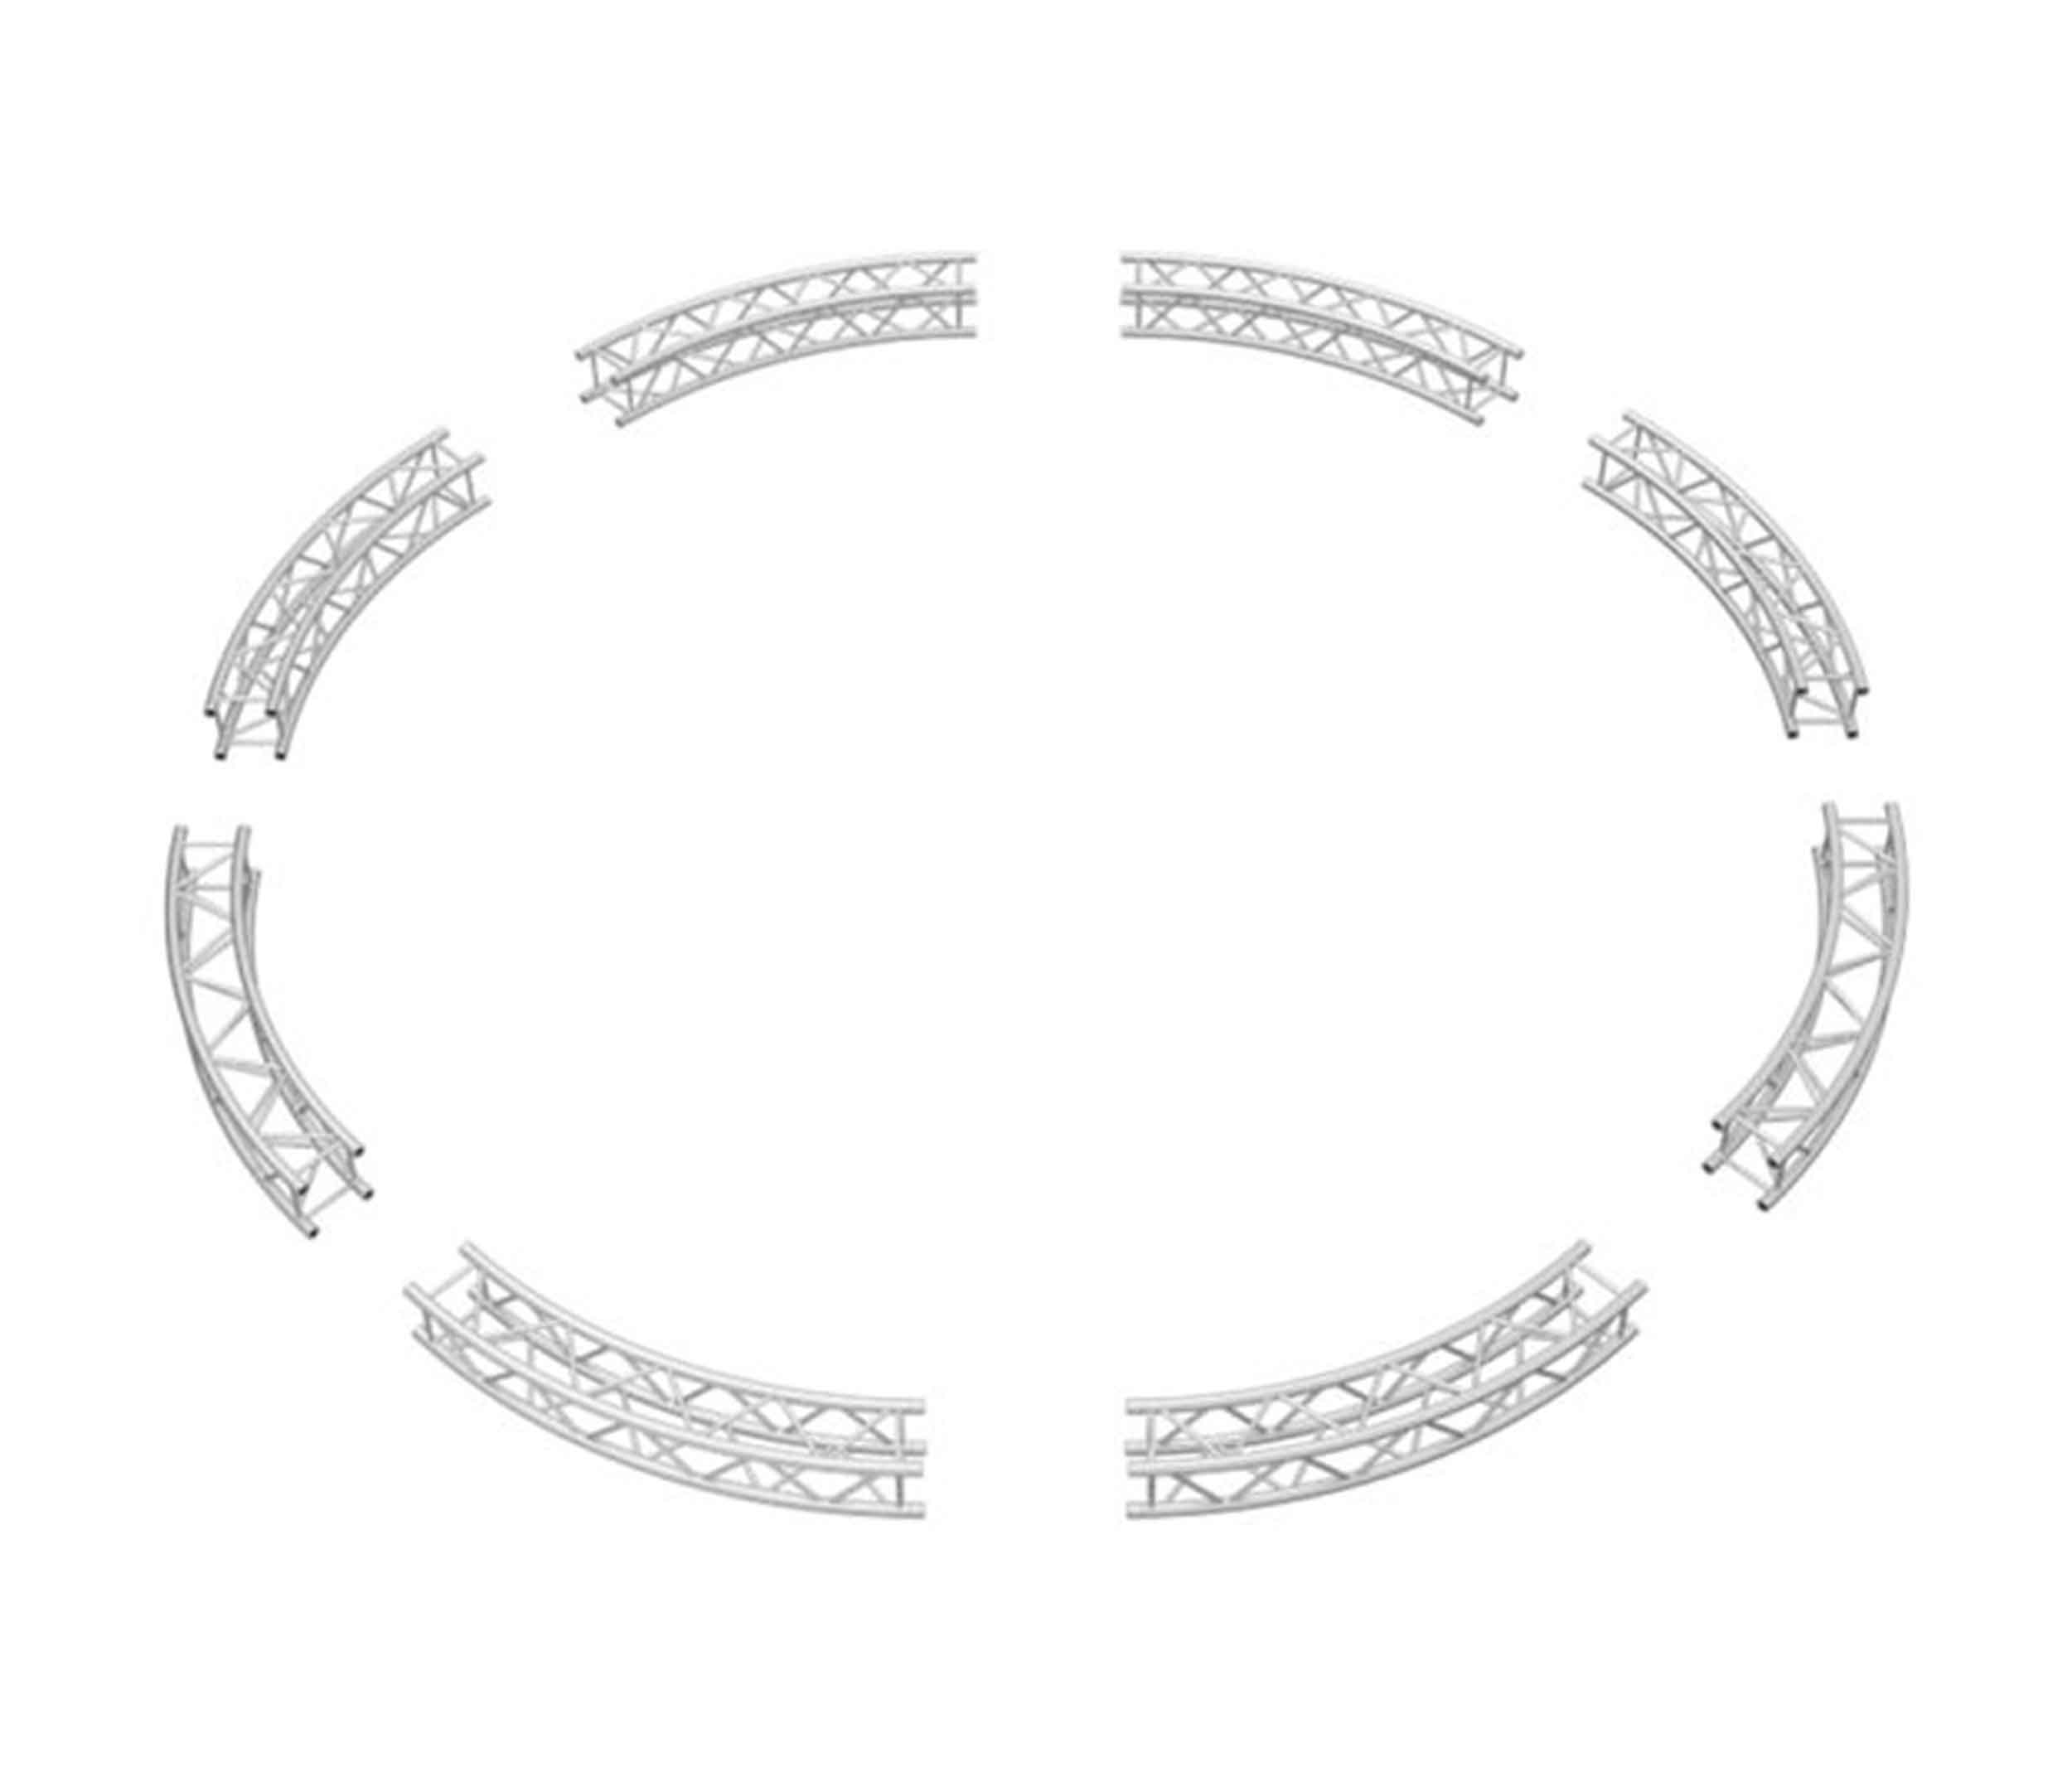 Global Truss SQ-C7-ARC45 One Single Part of Eight that Create 1 Full SQ-C7 Circle by Global Truss